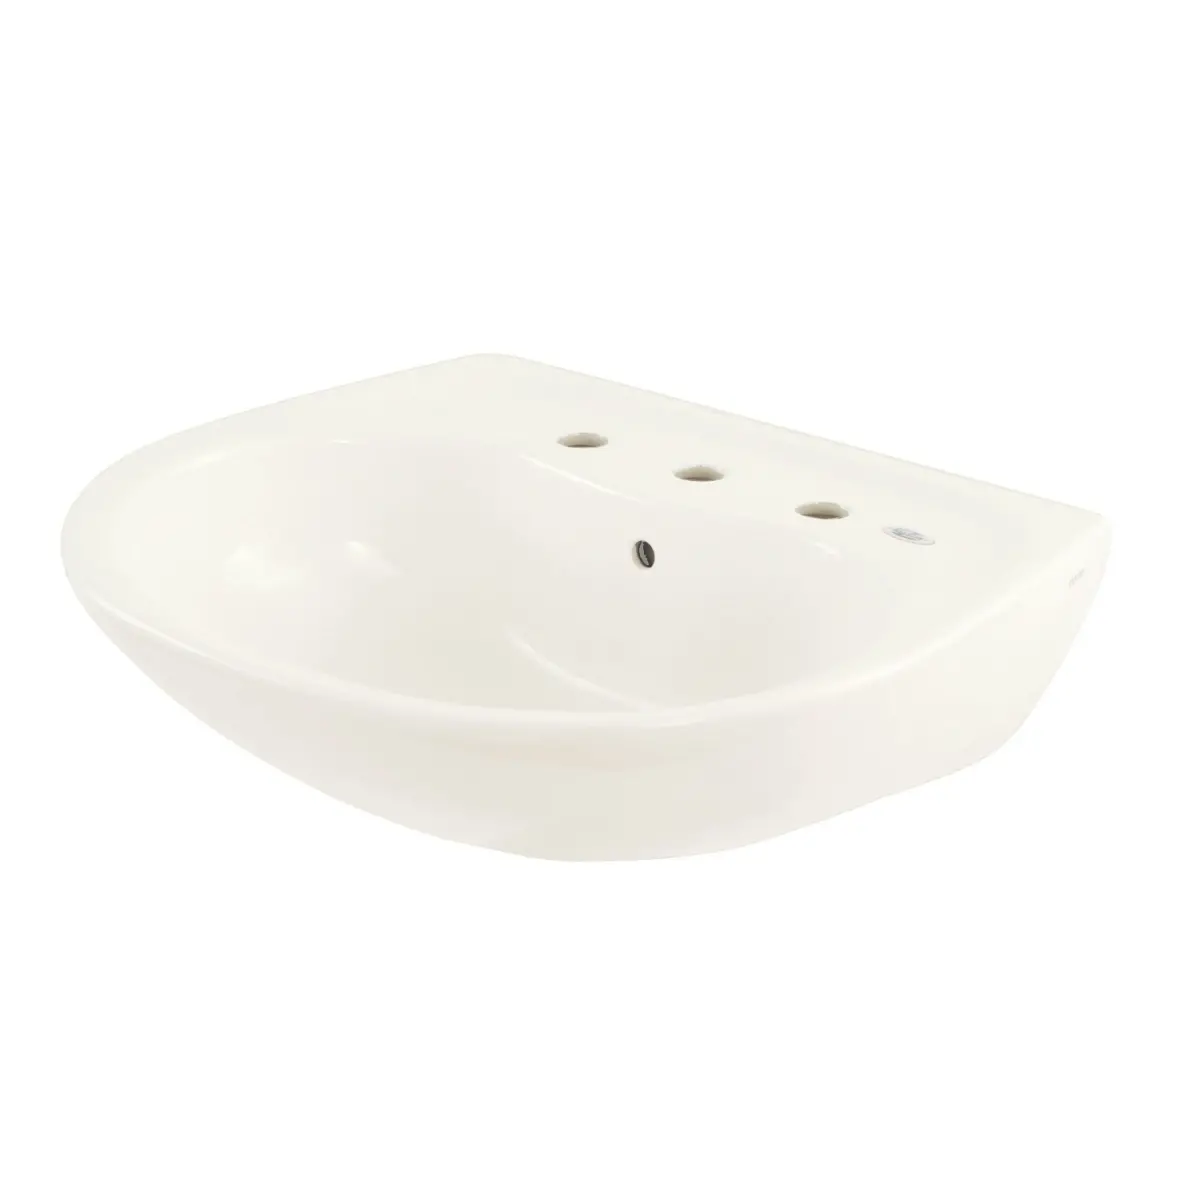 Toto LT241.8G#11 - Supreme 22-7/8" Wall Mounted Bathroom Sink with 3 Faucet Holes Drilled, Overflow